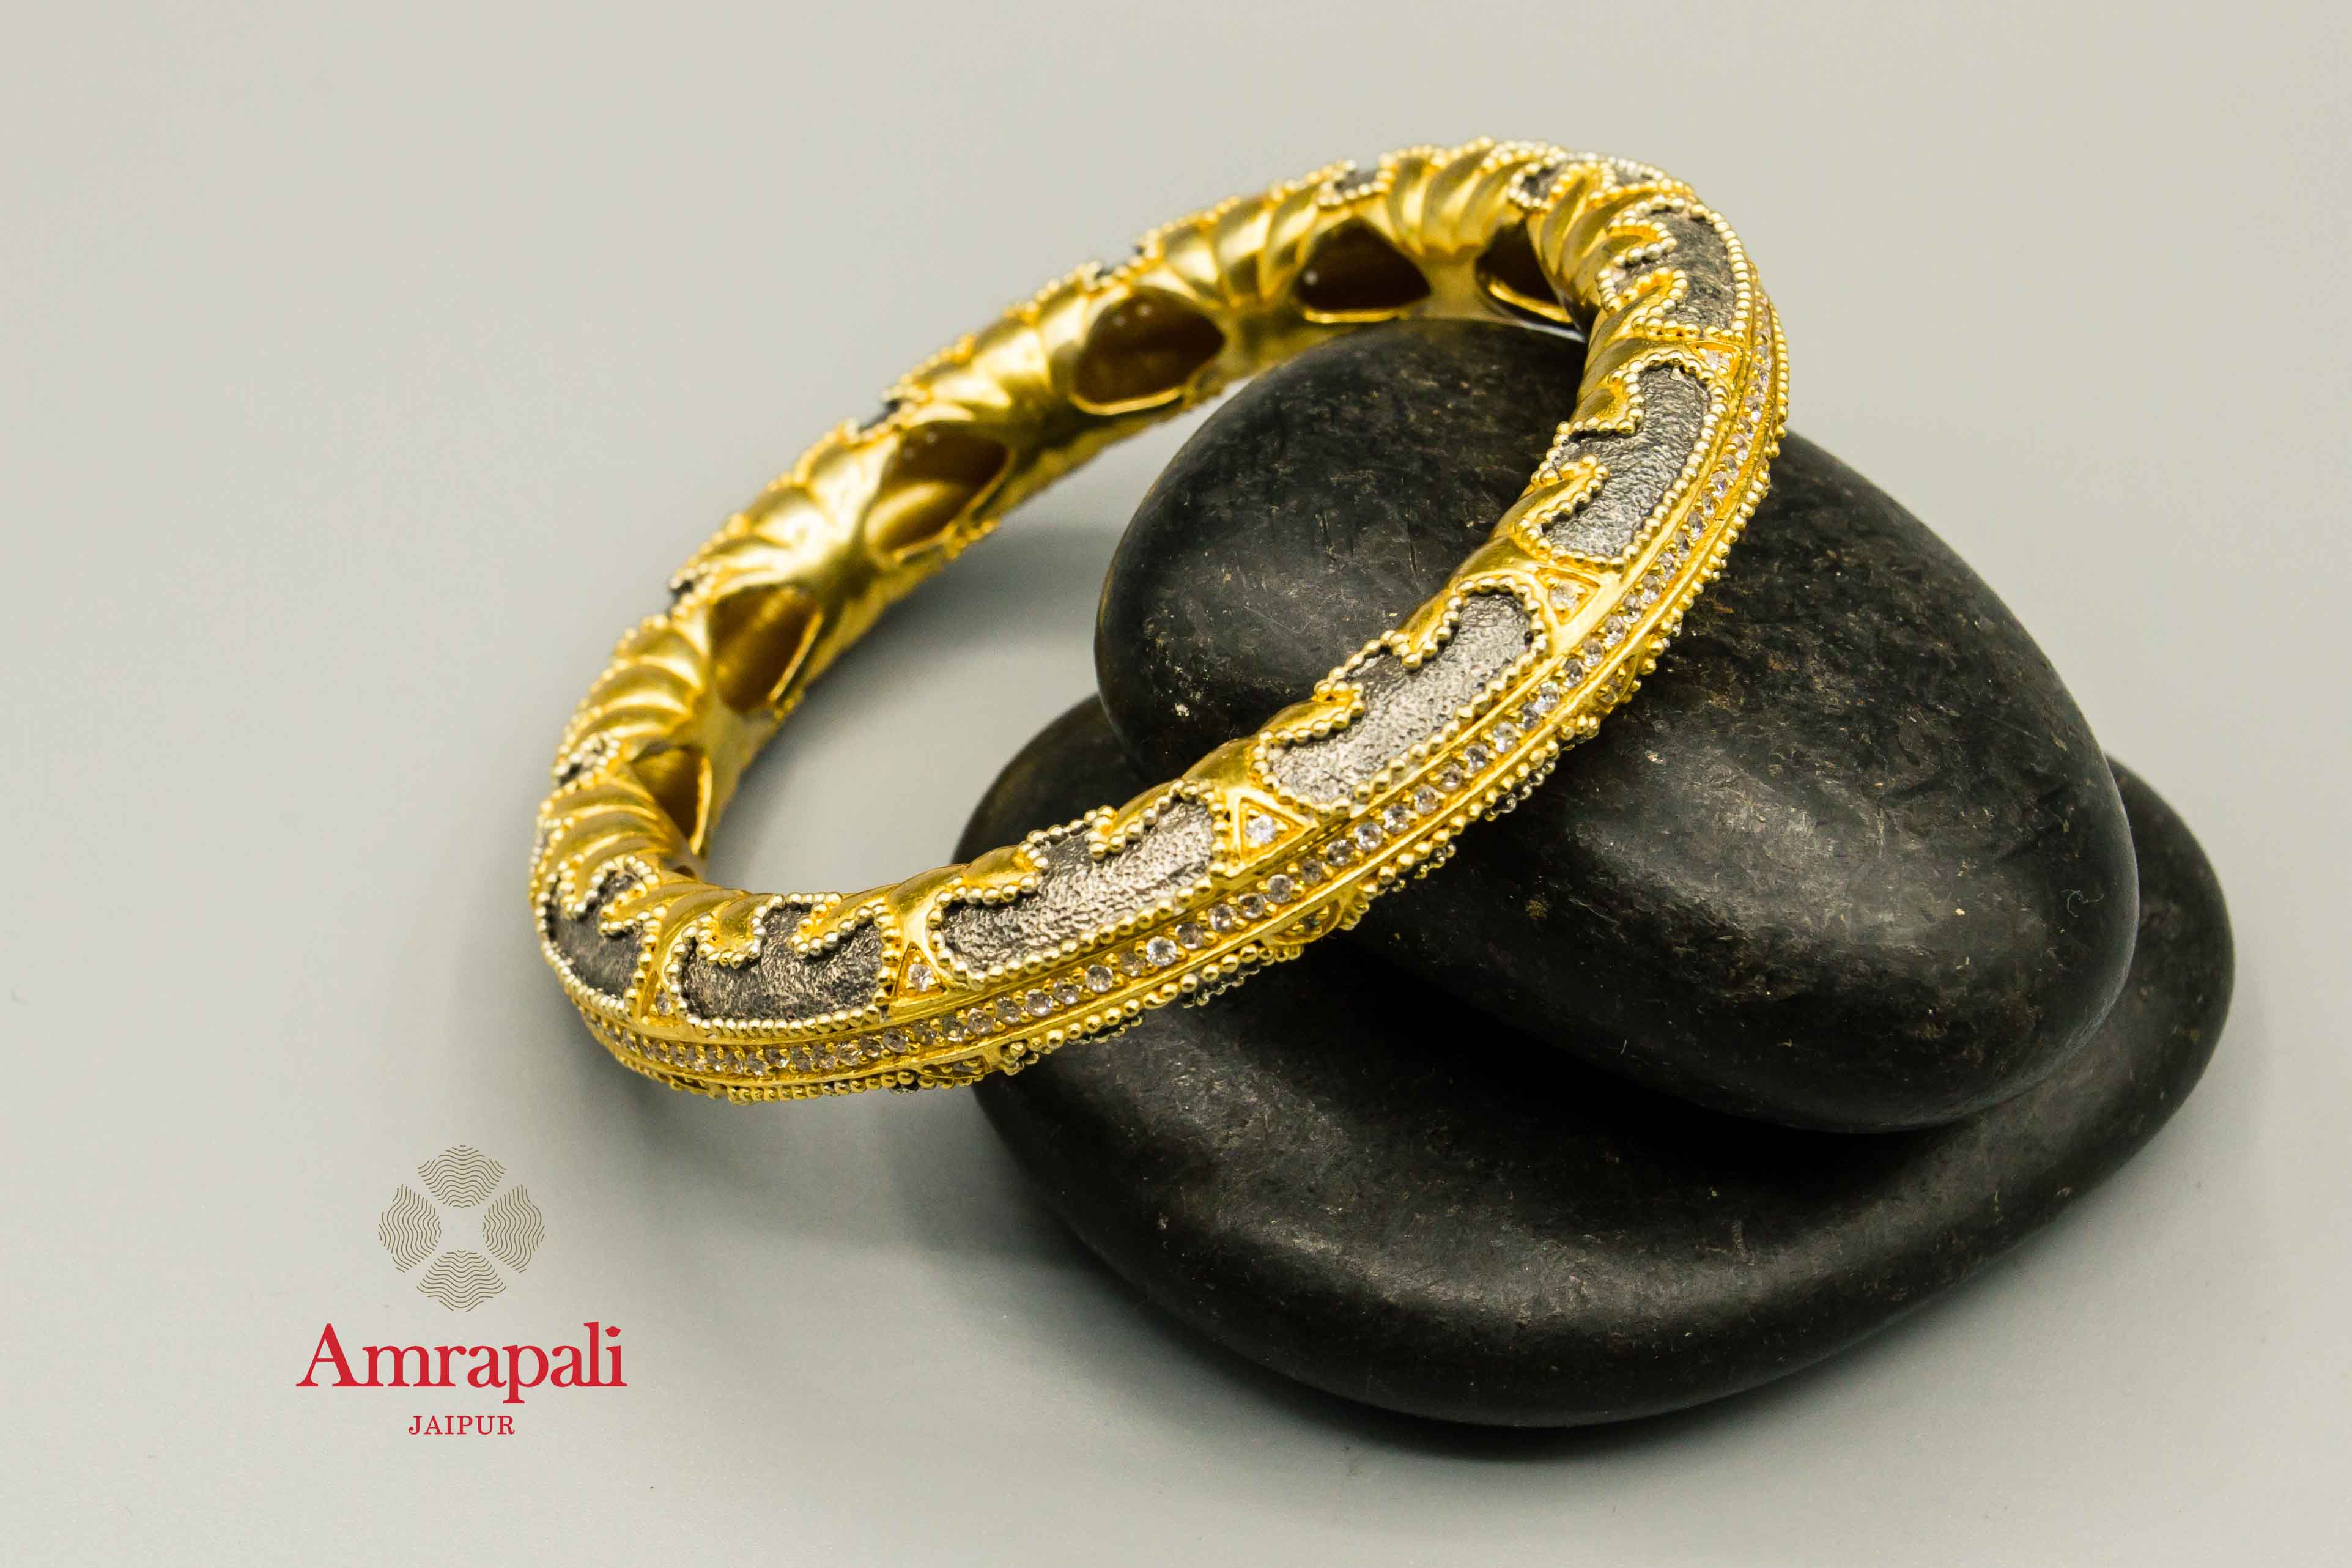 Buy Amrapali silver gold plated two-tone textured bangle online in USA. Raise your traditional fashion quotient on special occasions with exquisite Indian jewelry from Pure Elegance Indian clothing store in USA. Enhance your look with silver gold plated jewelry, wedding jewellery available online.-flatlay